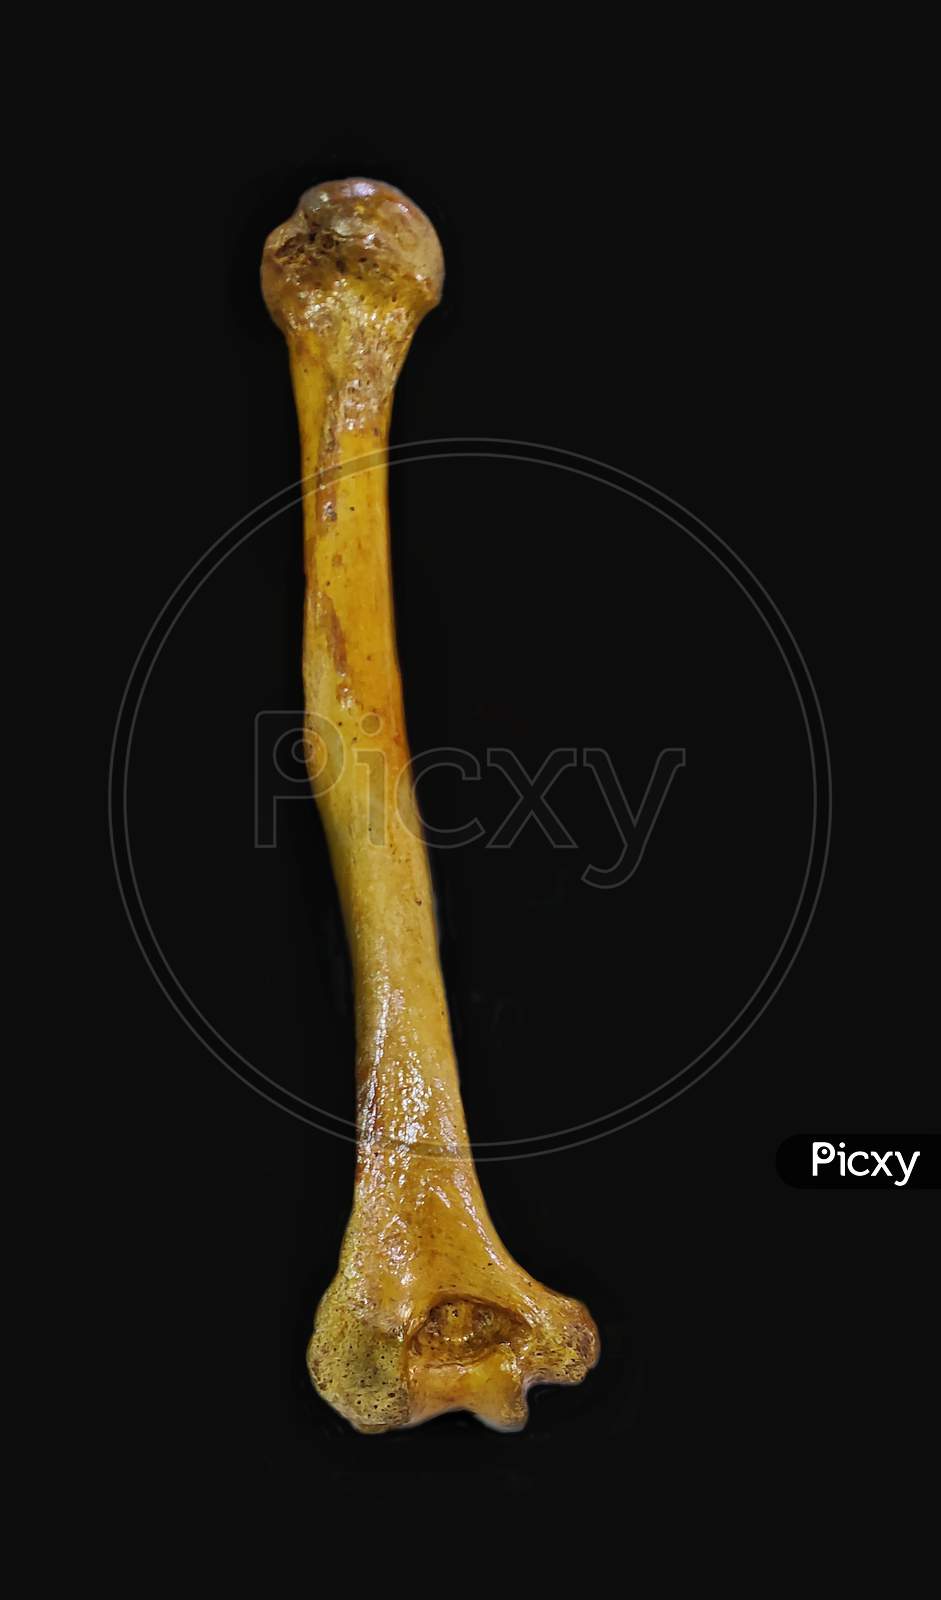 HUMERUS, a long bone in the human arm connecting the shoulder joint and elbow..it provides attachment to triceps and biceps muscle